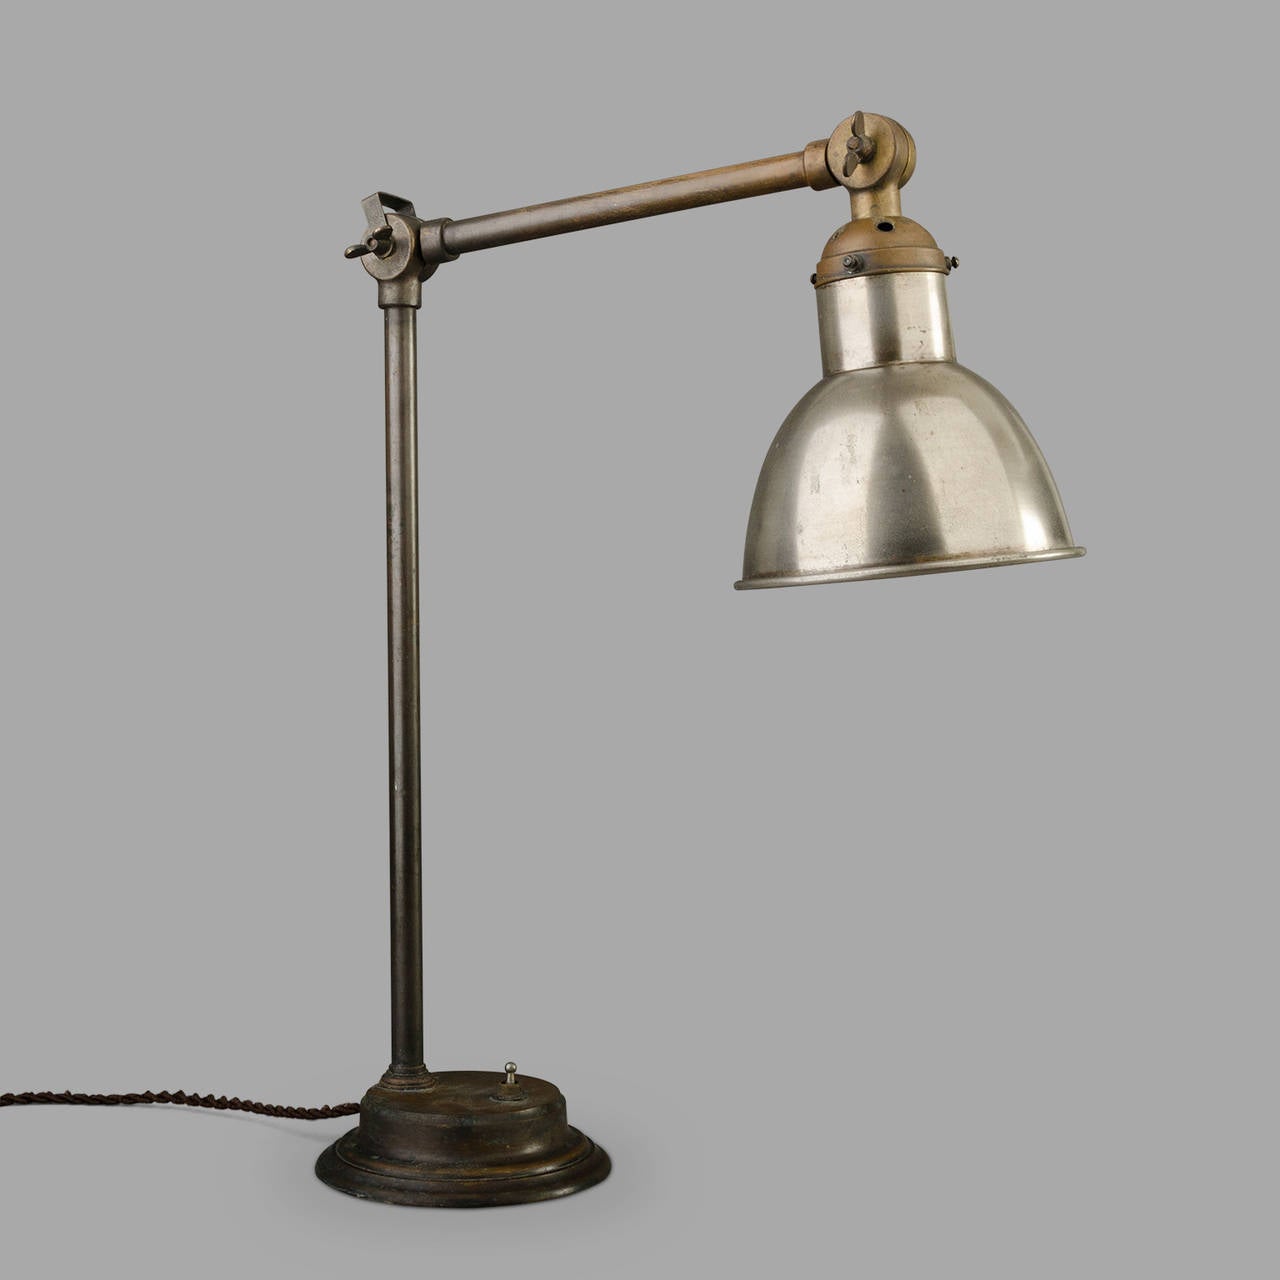 French Brass and Nickel-Plated Steel Desk Lamp, c. 1930